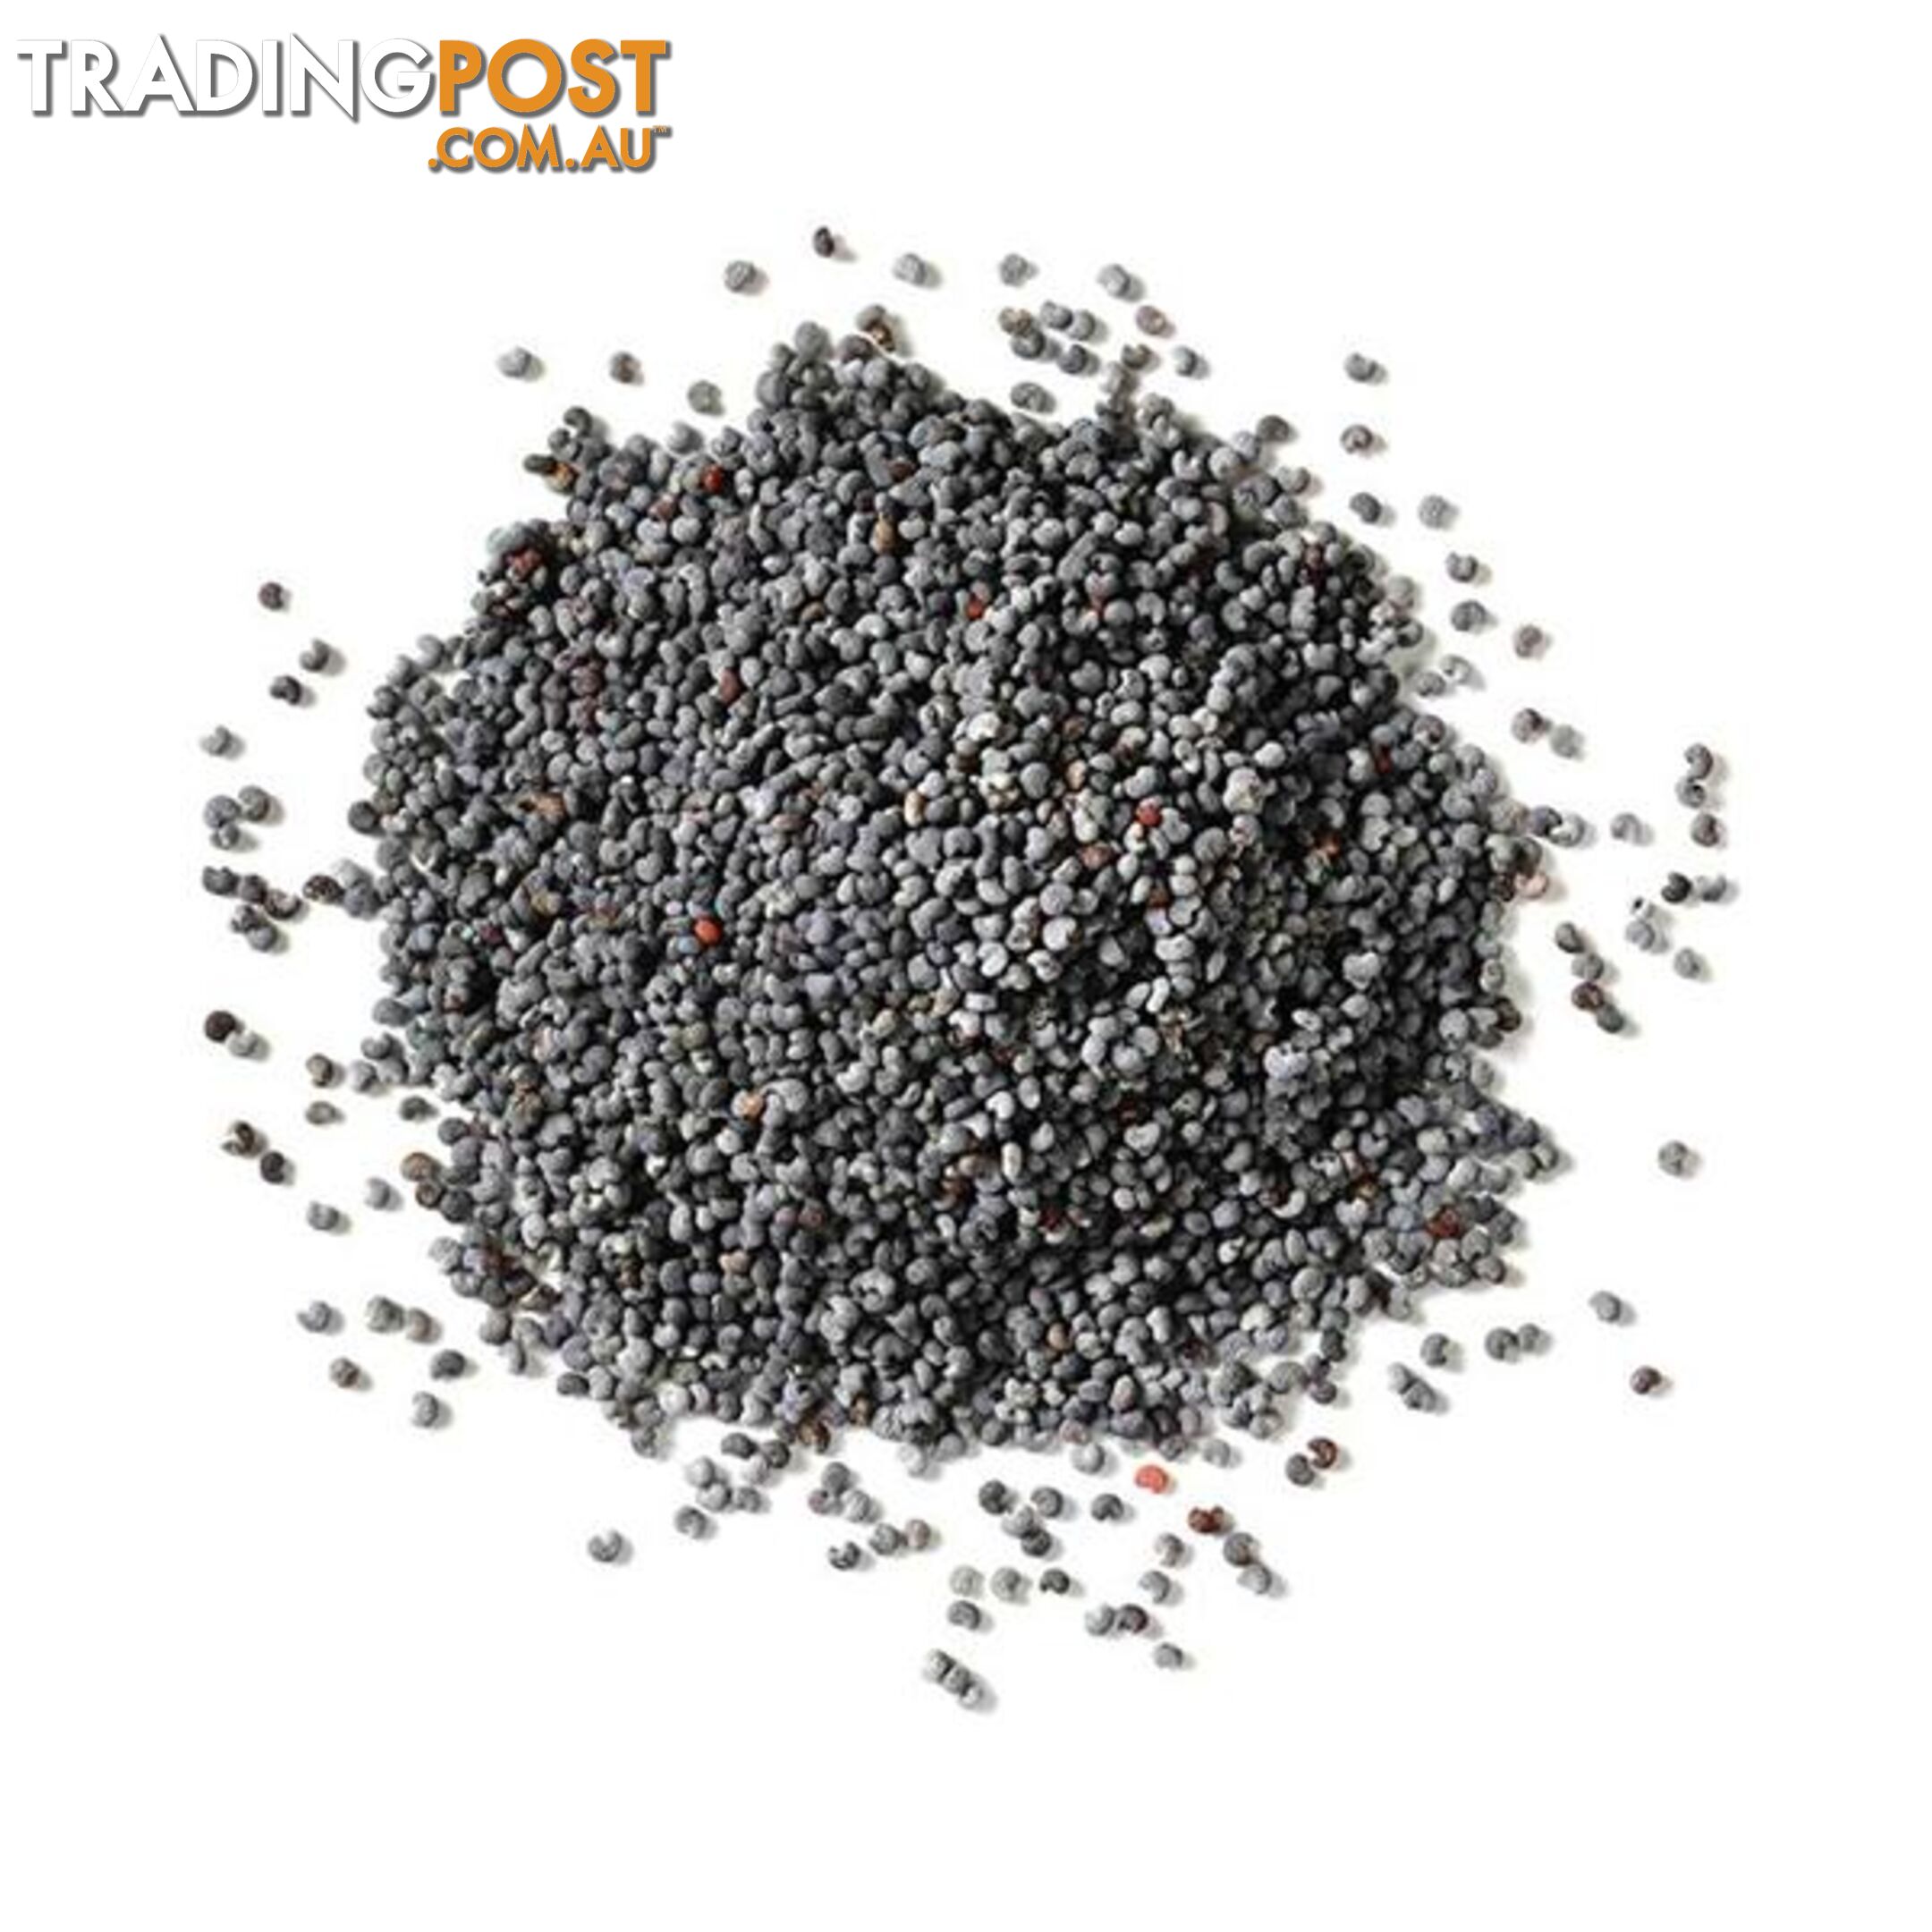 10 Kg Poppy Seeds Pouch Blue Unwashed Australian Food Baking Cooking - Unbranded - 7427046261517